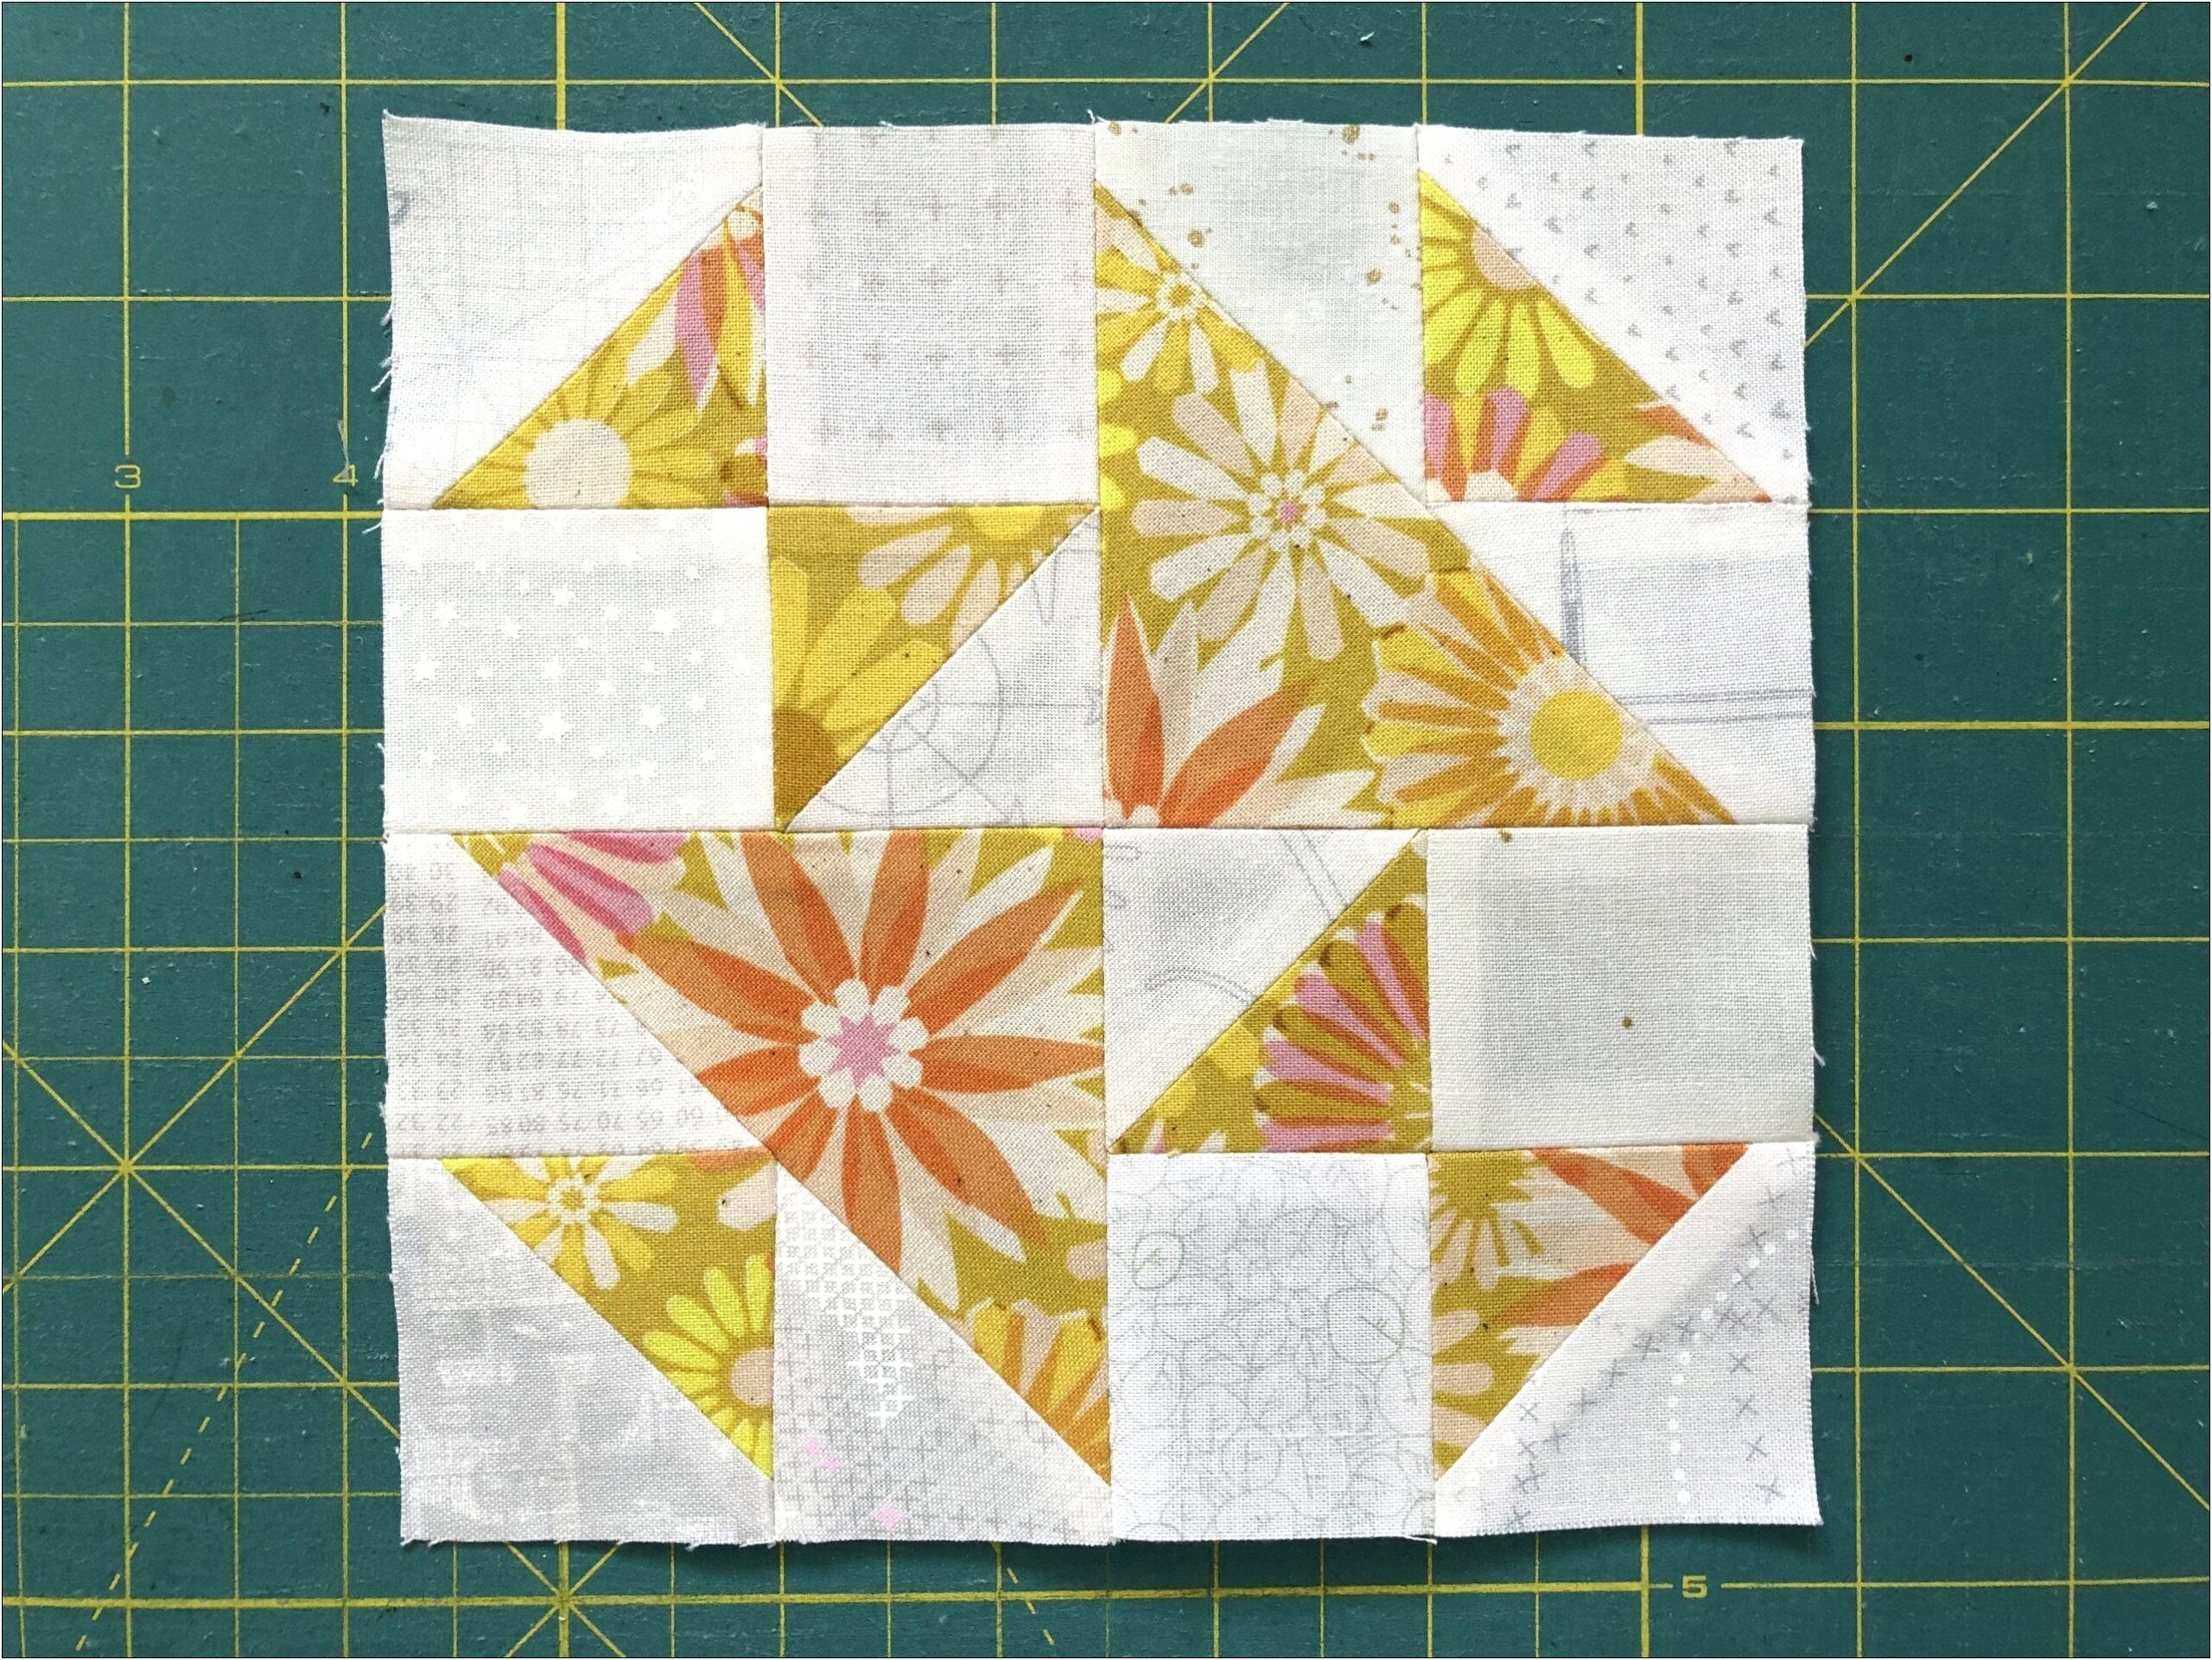 Free Easy Bear Claw Quilt Pattern Templates